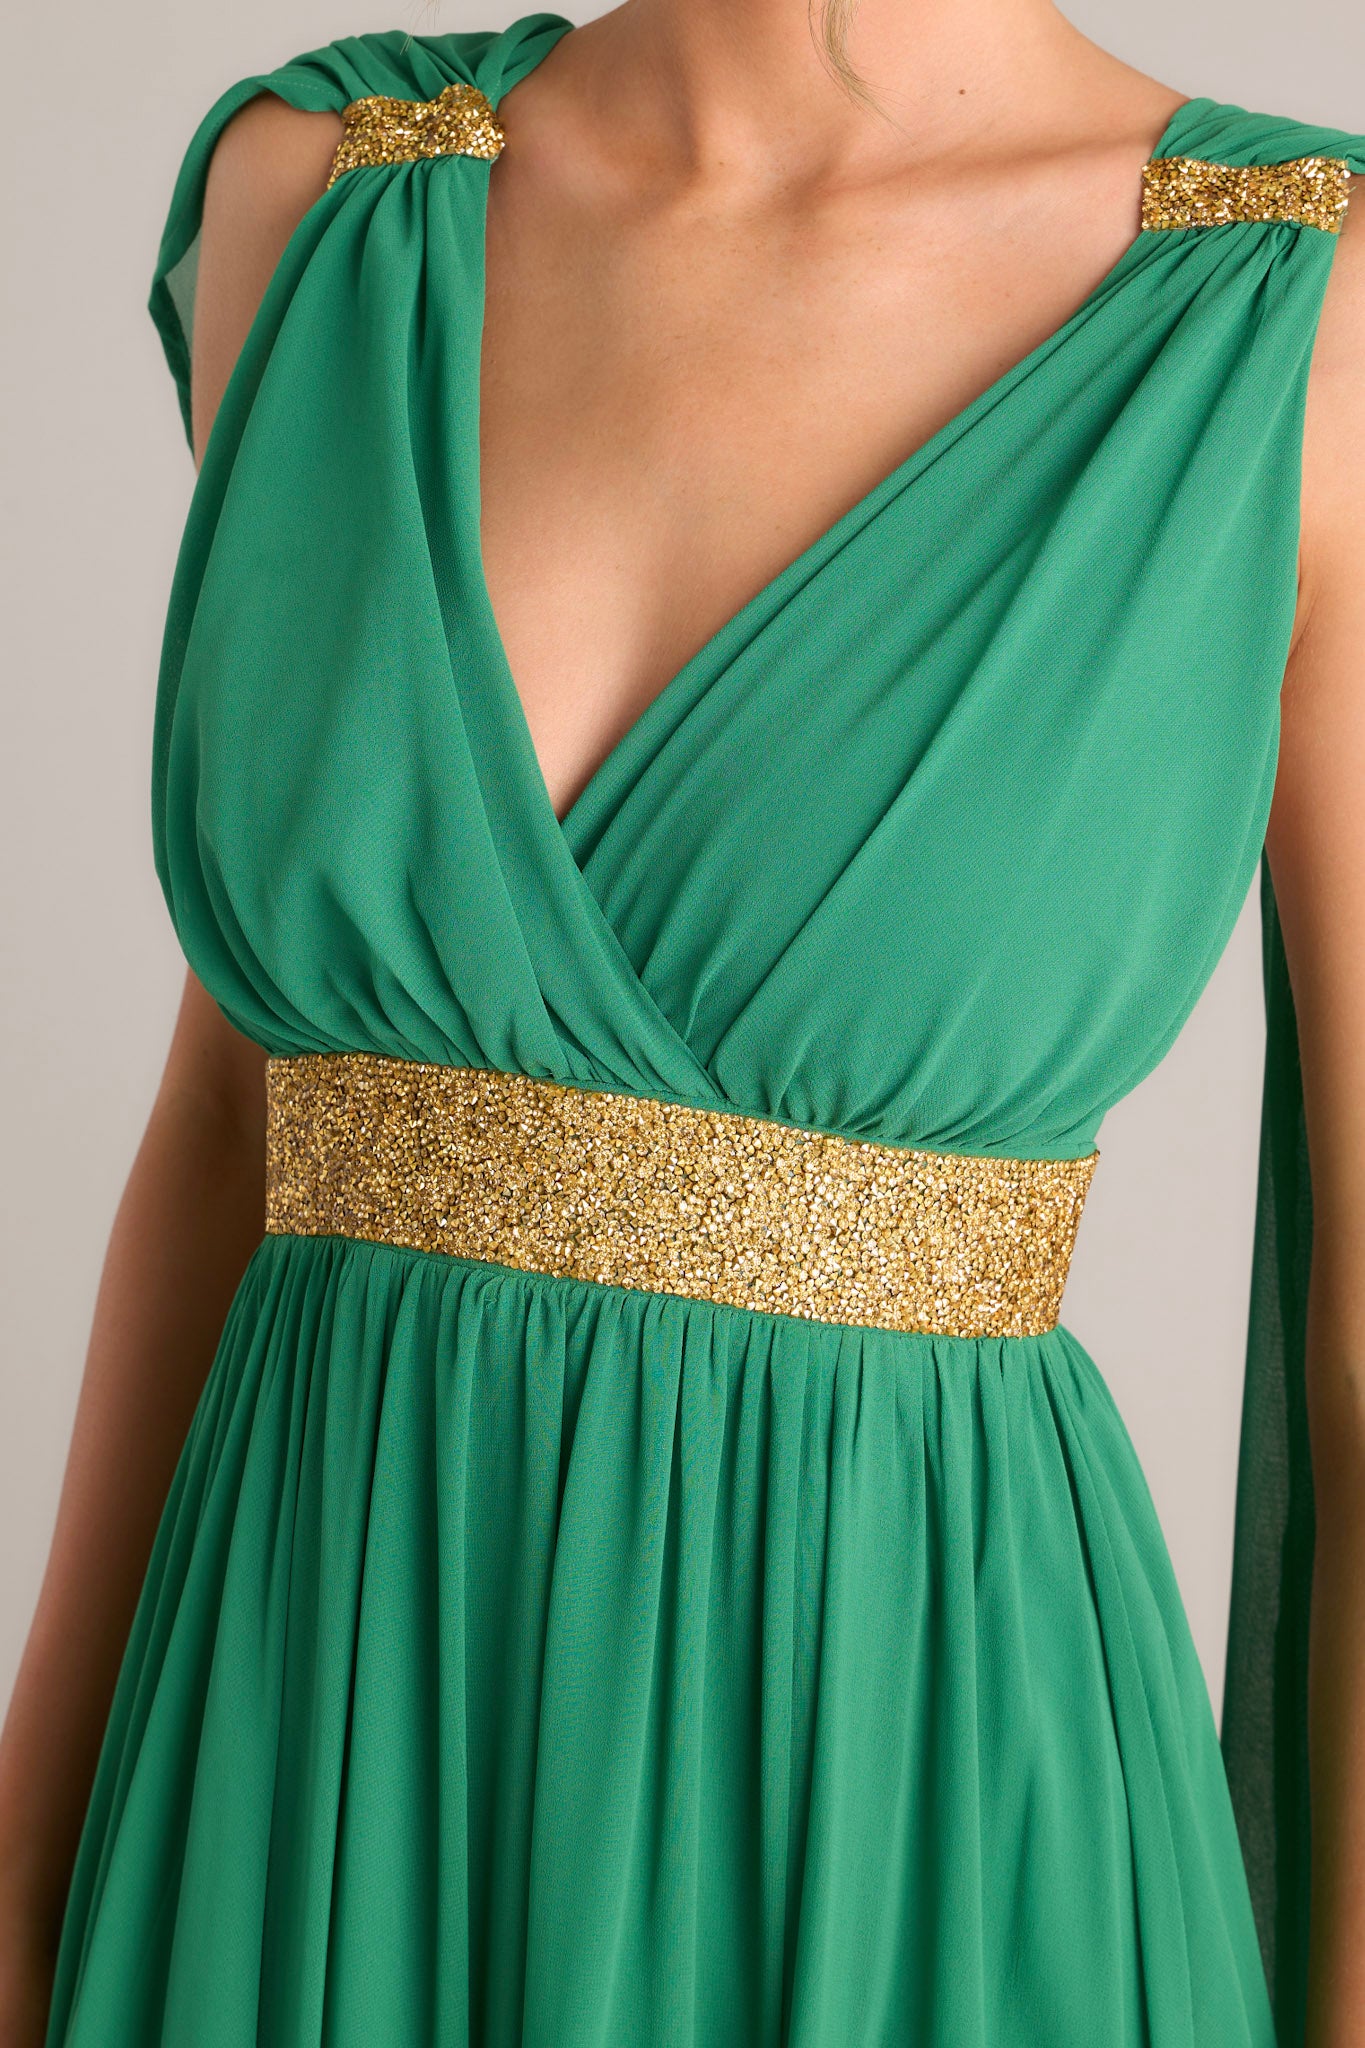 Close-up of the green dress showing the v-neckline, rhinestone detailing, and fabric trailing from the shoulder.